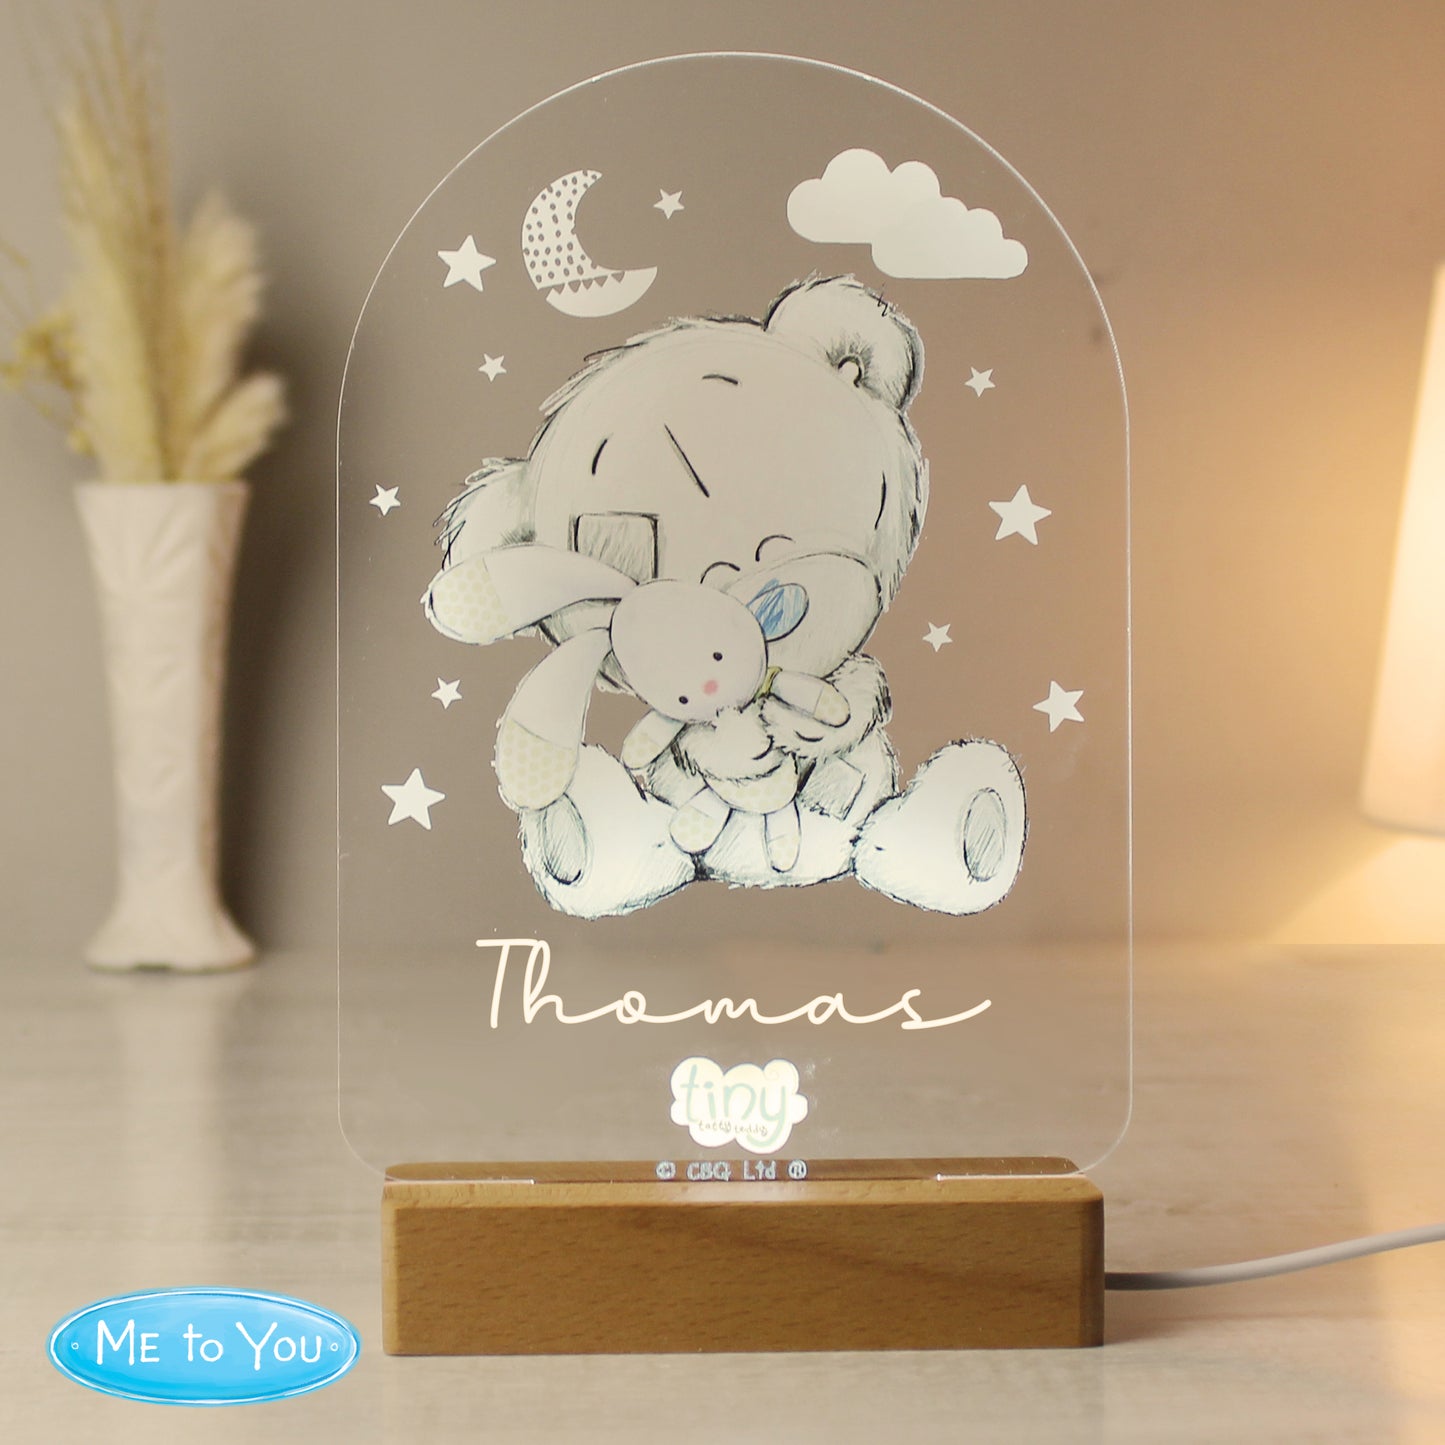 Personalised Tiny Tatty Teddy (Me to You) Wooden Based LED Light